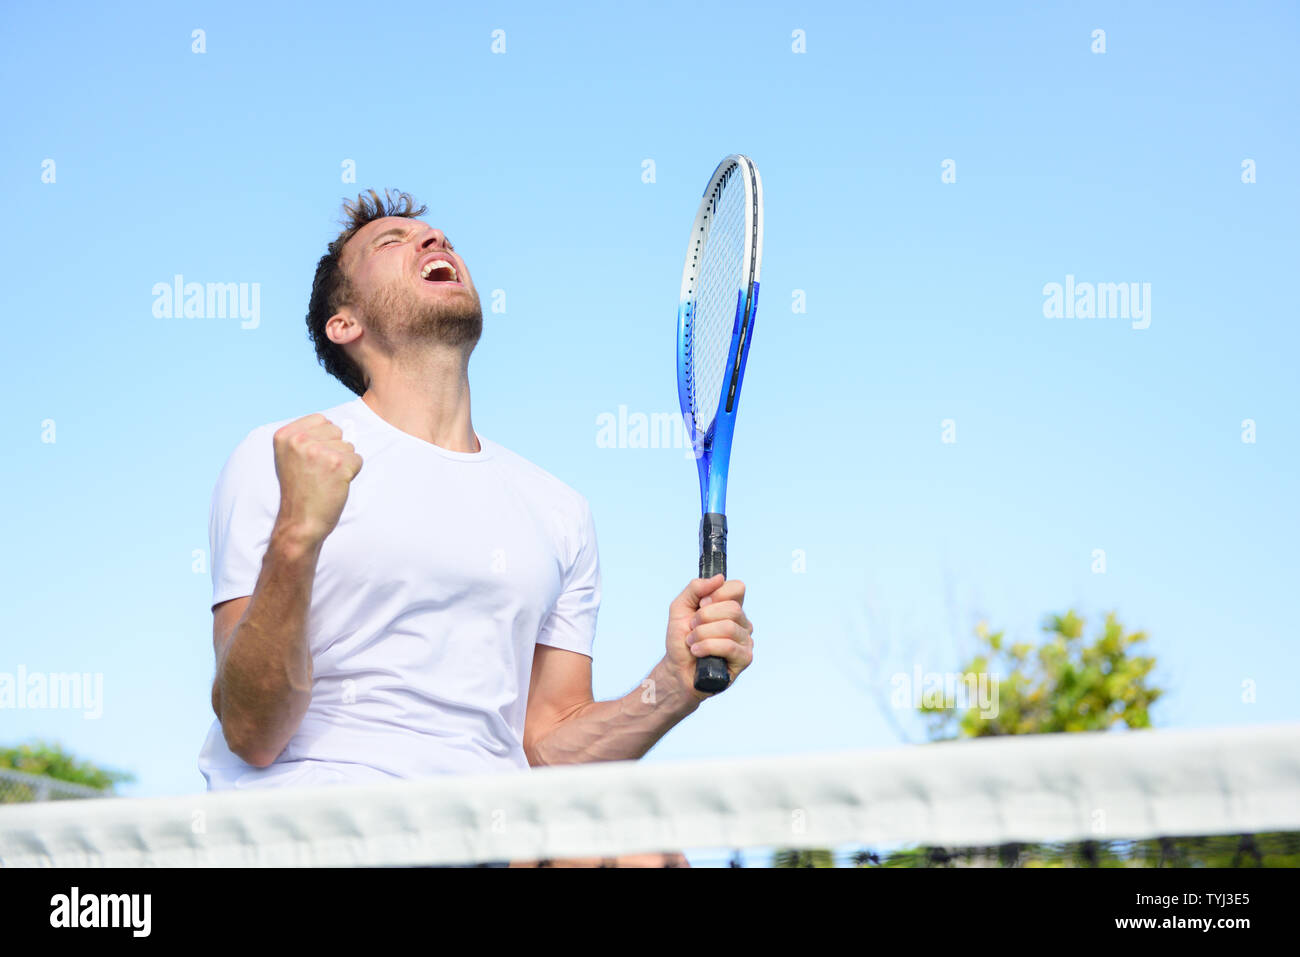 Tennis player man winning cheering celebrating victory. Winner man happy in celebration of success and win. Fit male athlete on tennis court outdoors holding tennis racket in triumph by the net. Stock Photo